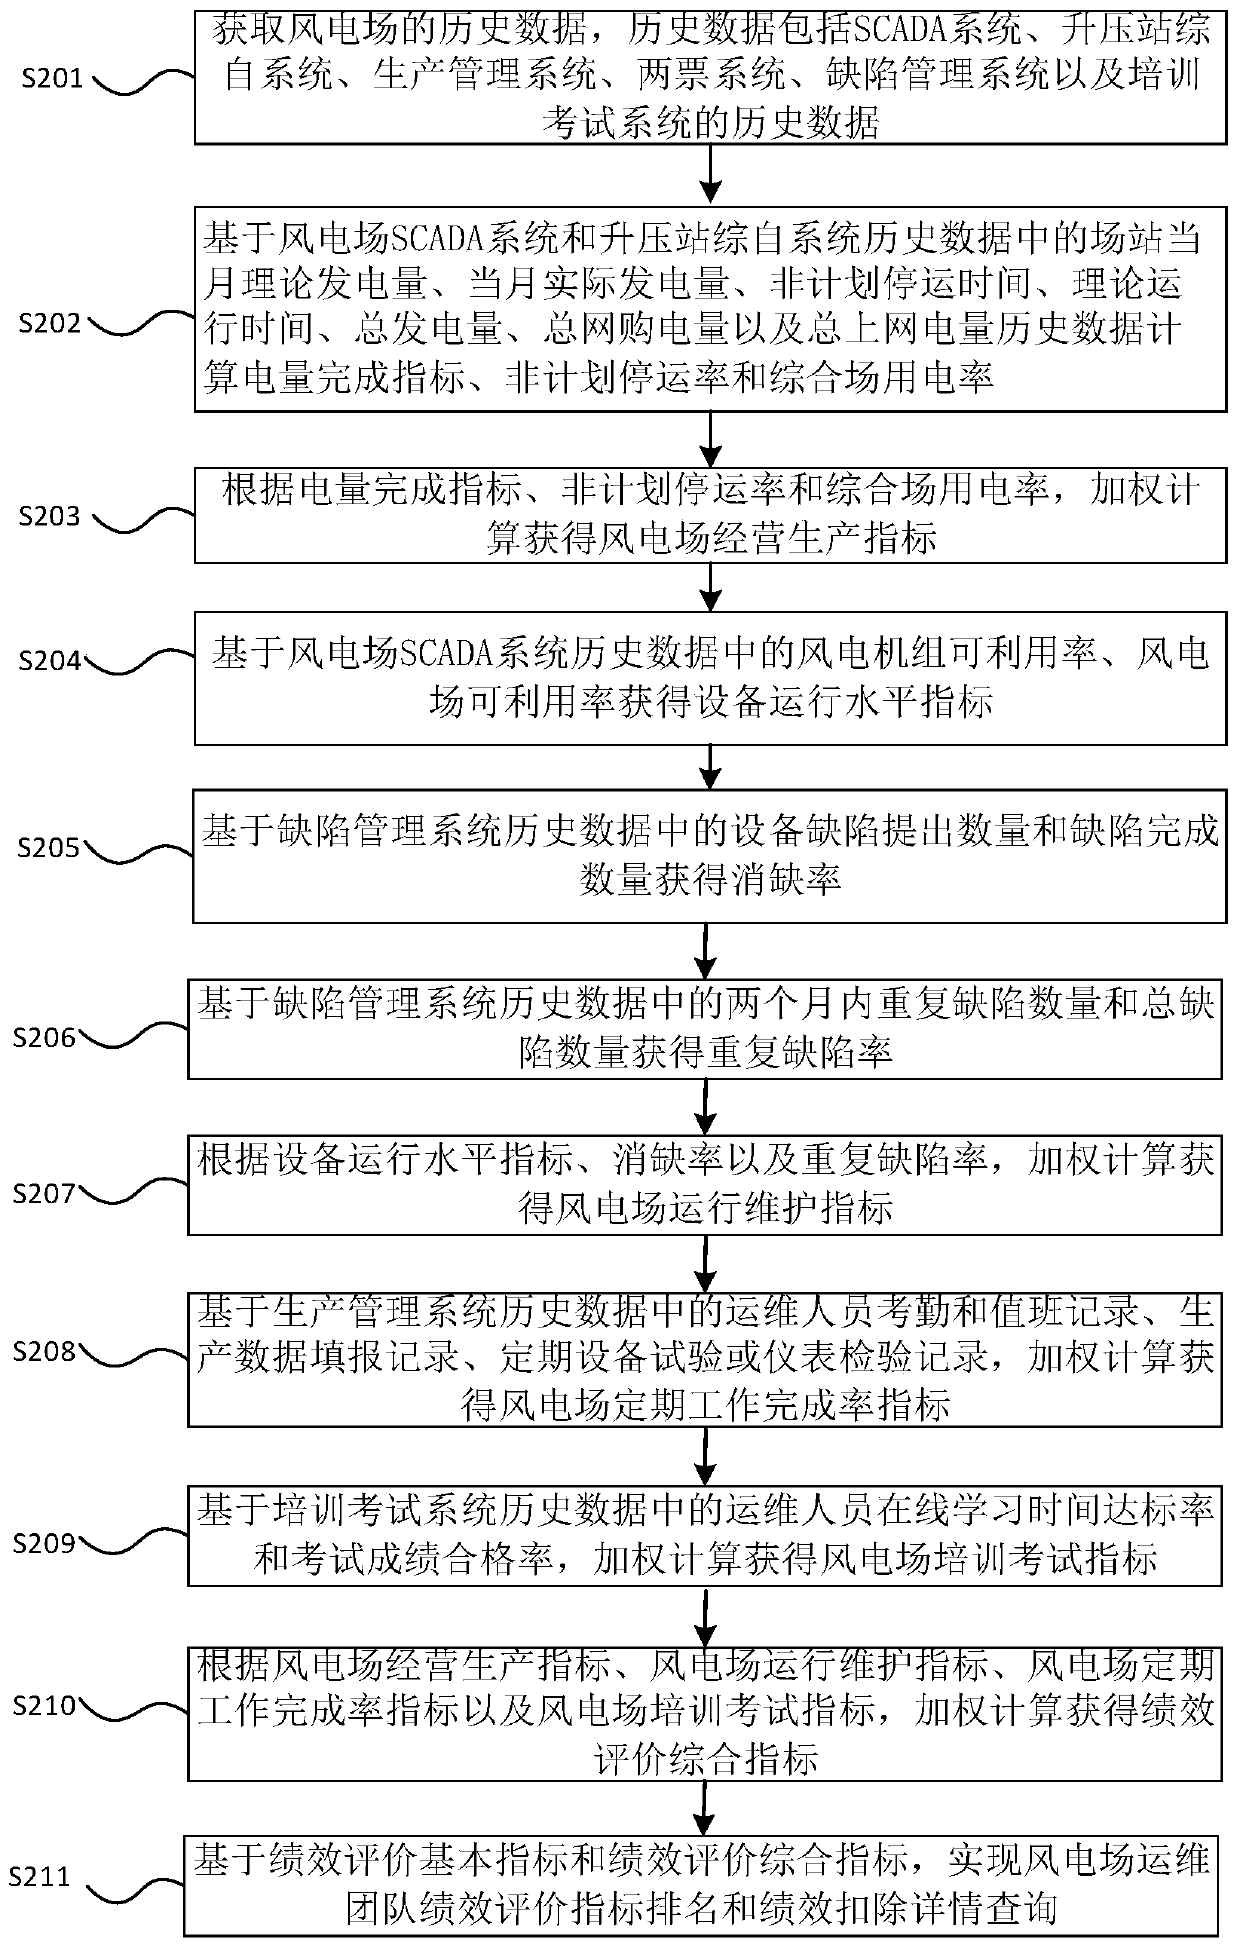 Wind power plant operation and maintenance performance evaluation management method and system